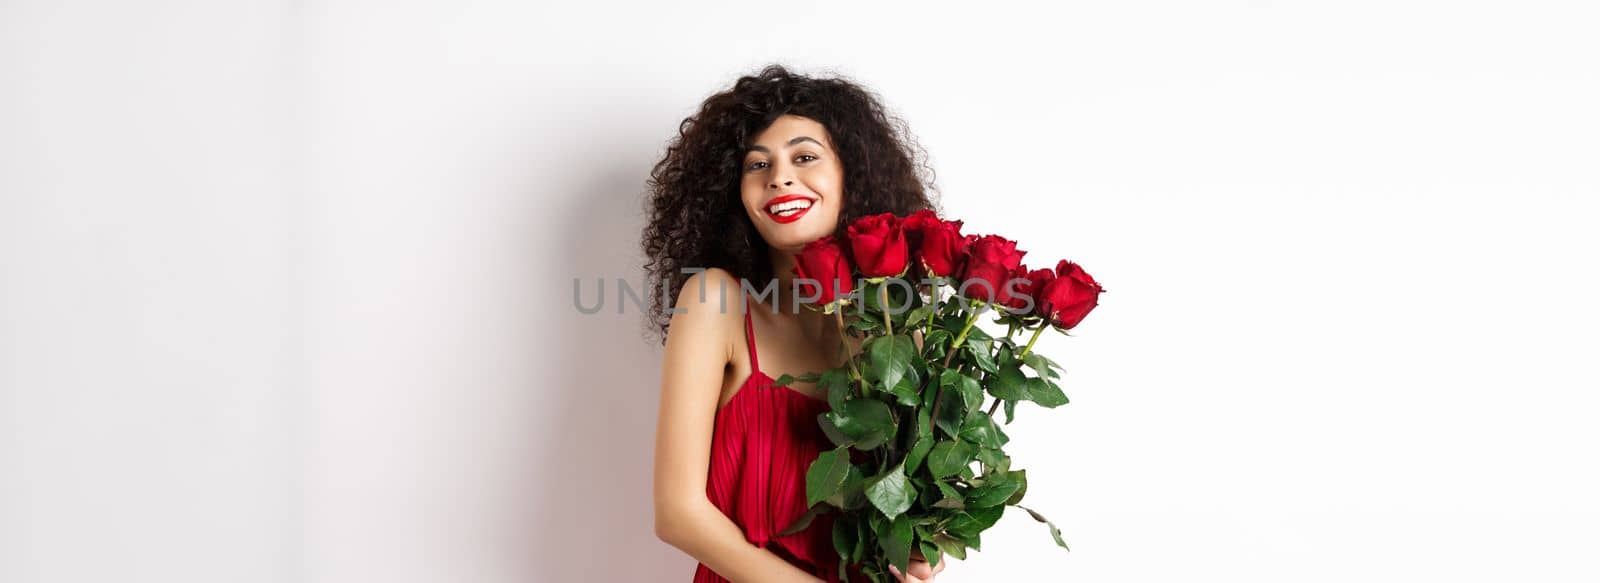 Romantic lady with curly hair and fashionable dress, holding bouquet of red roses and smiling, standing happy on white background.